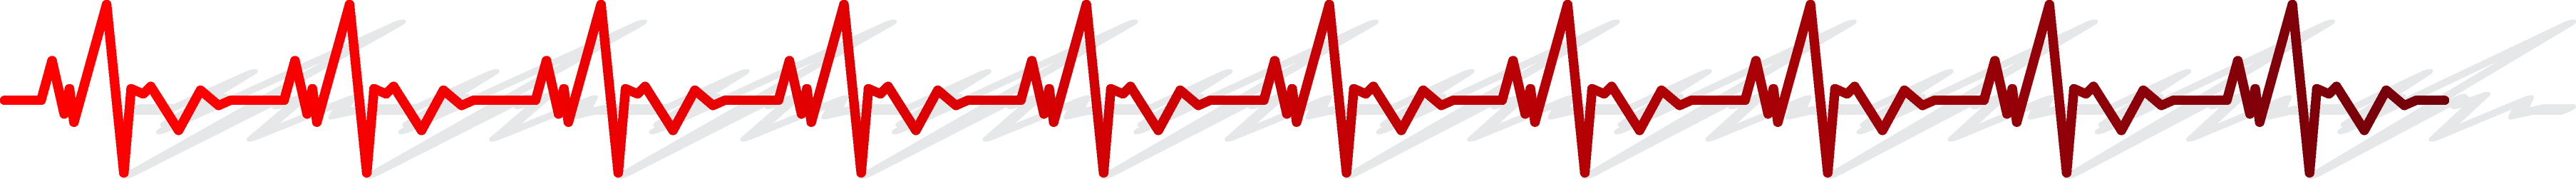 Clipart wave heartbeat. Heart beat png hd